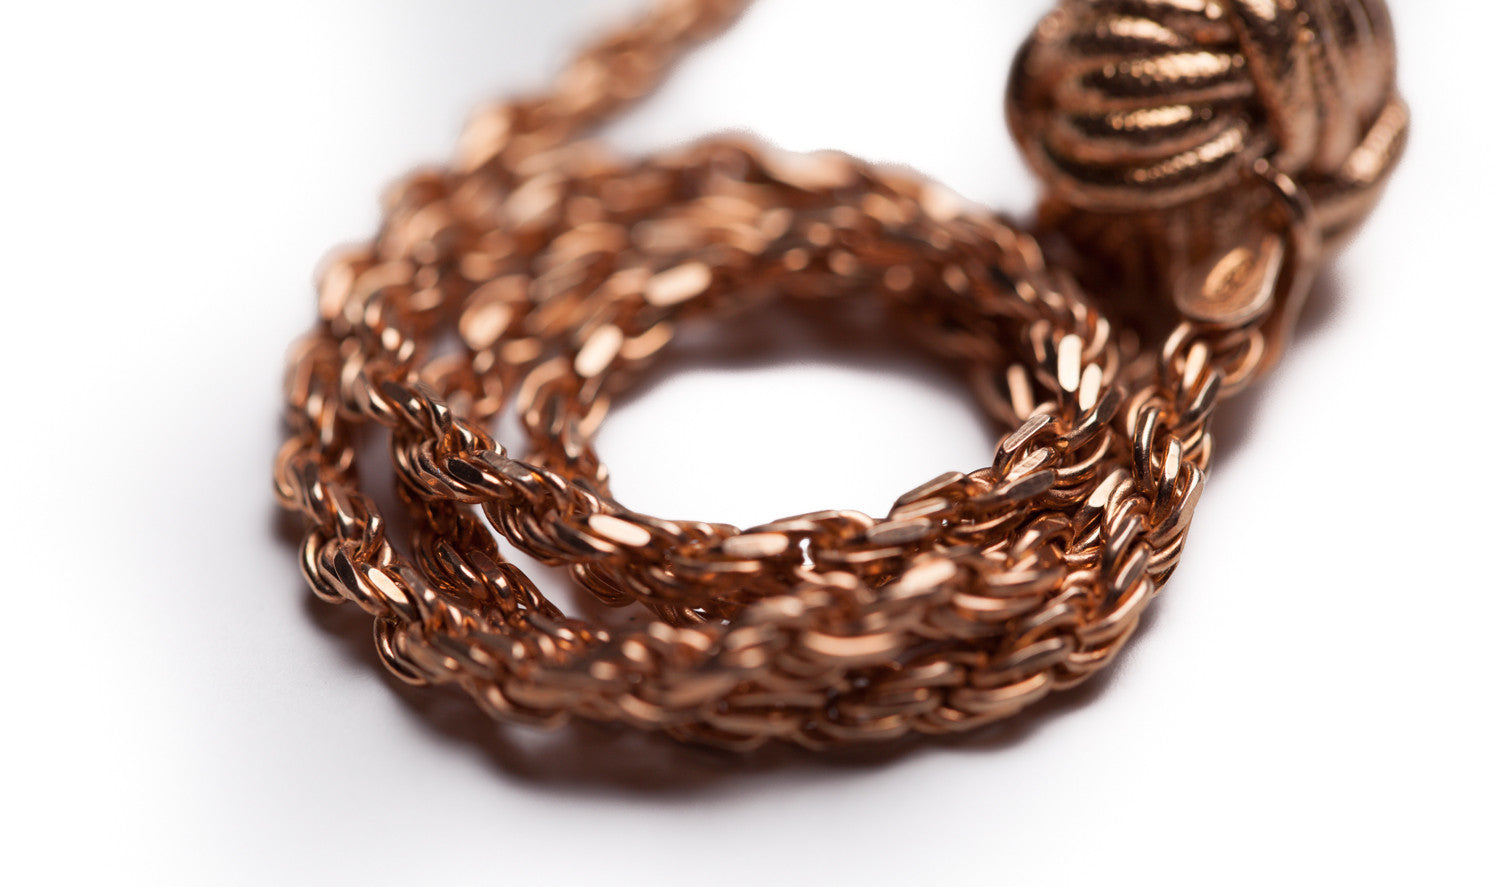 Infinity Knot Rose Gold Lapel Chain